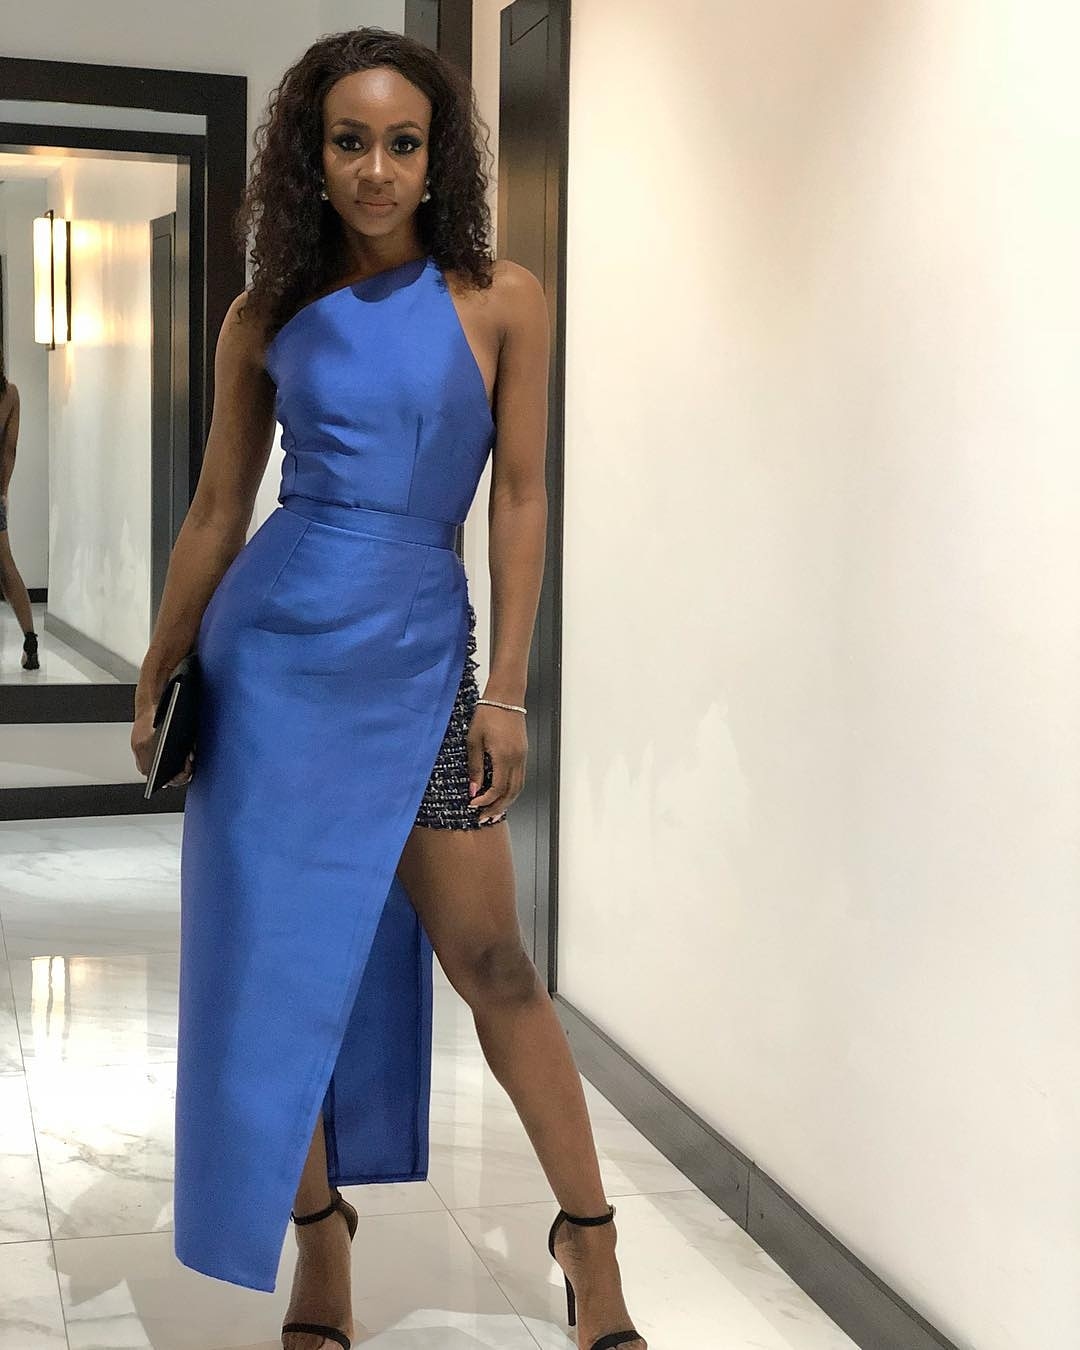 AMVCA 2018 NOMINEES COCKTAIL PARTY (SEE PHOTOS)